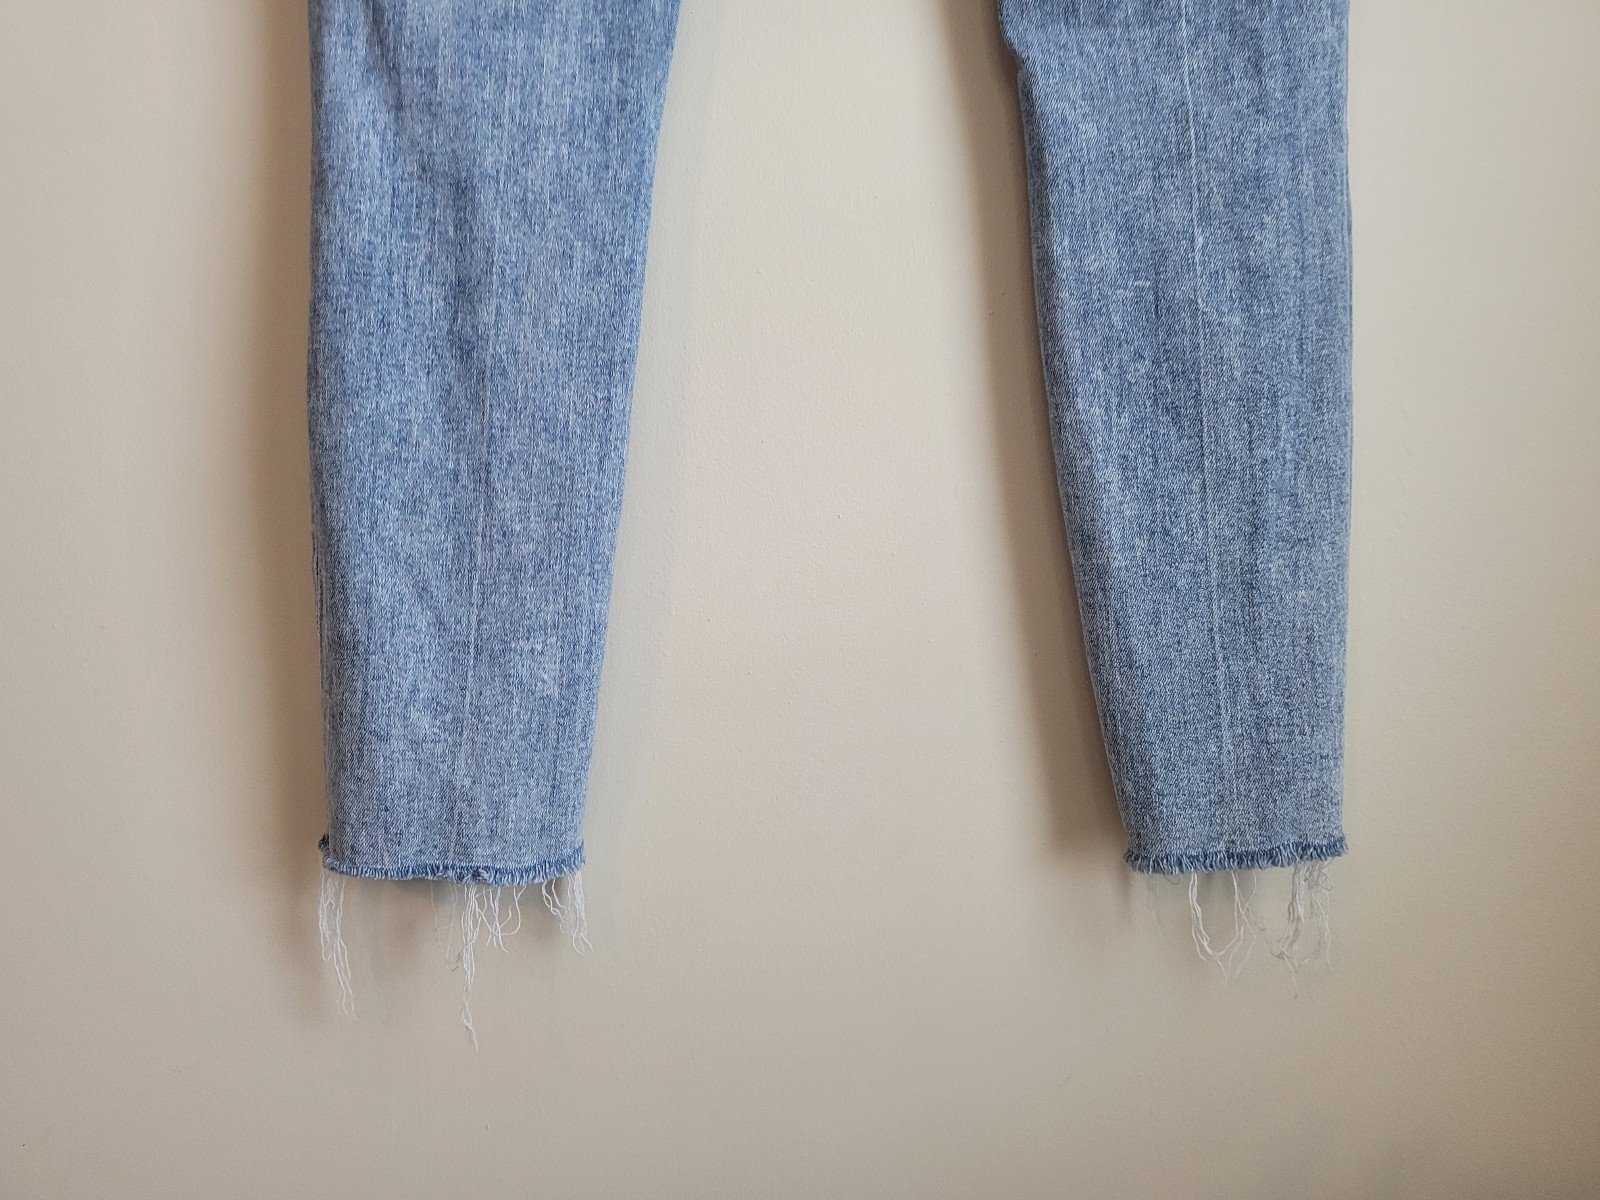 Popular Abercrombie & Fitch High-Rise Super Skinny Ankle Jeans Size 26 inch Long/Tall fSulKQ2xF on sale